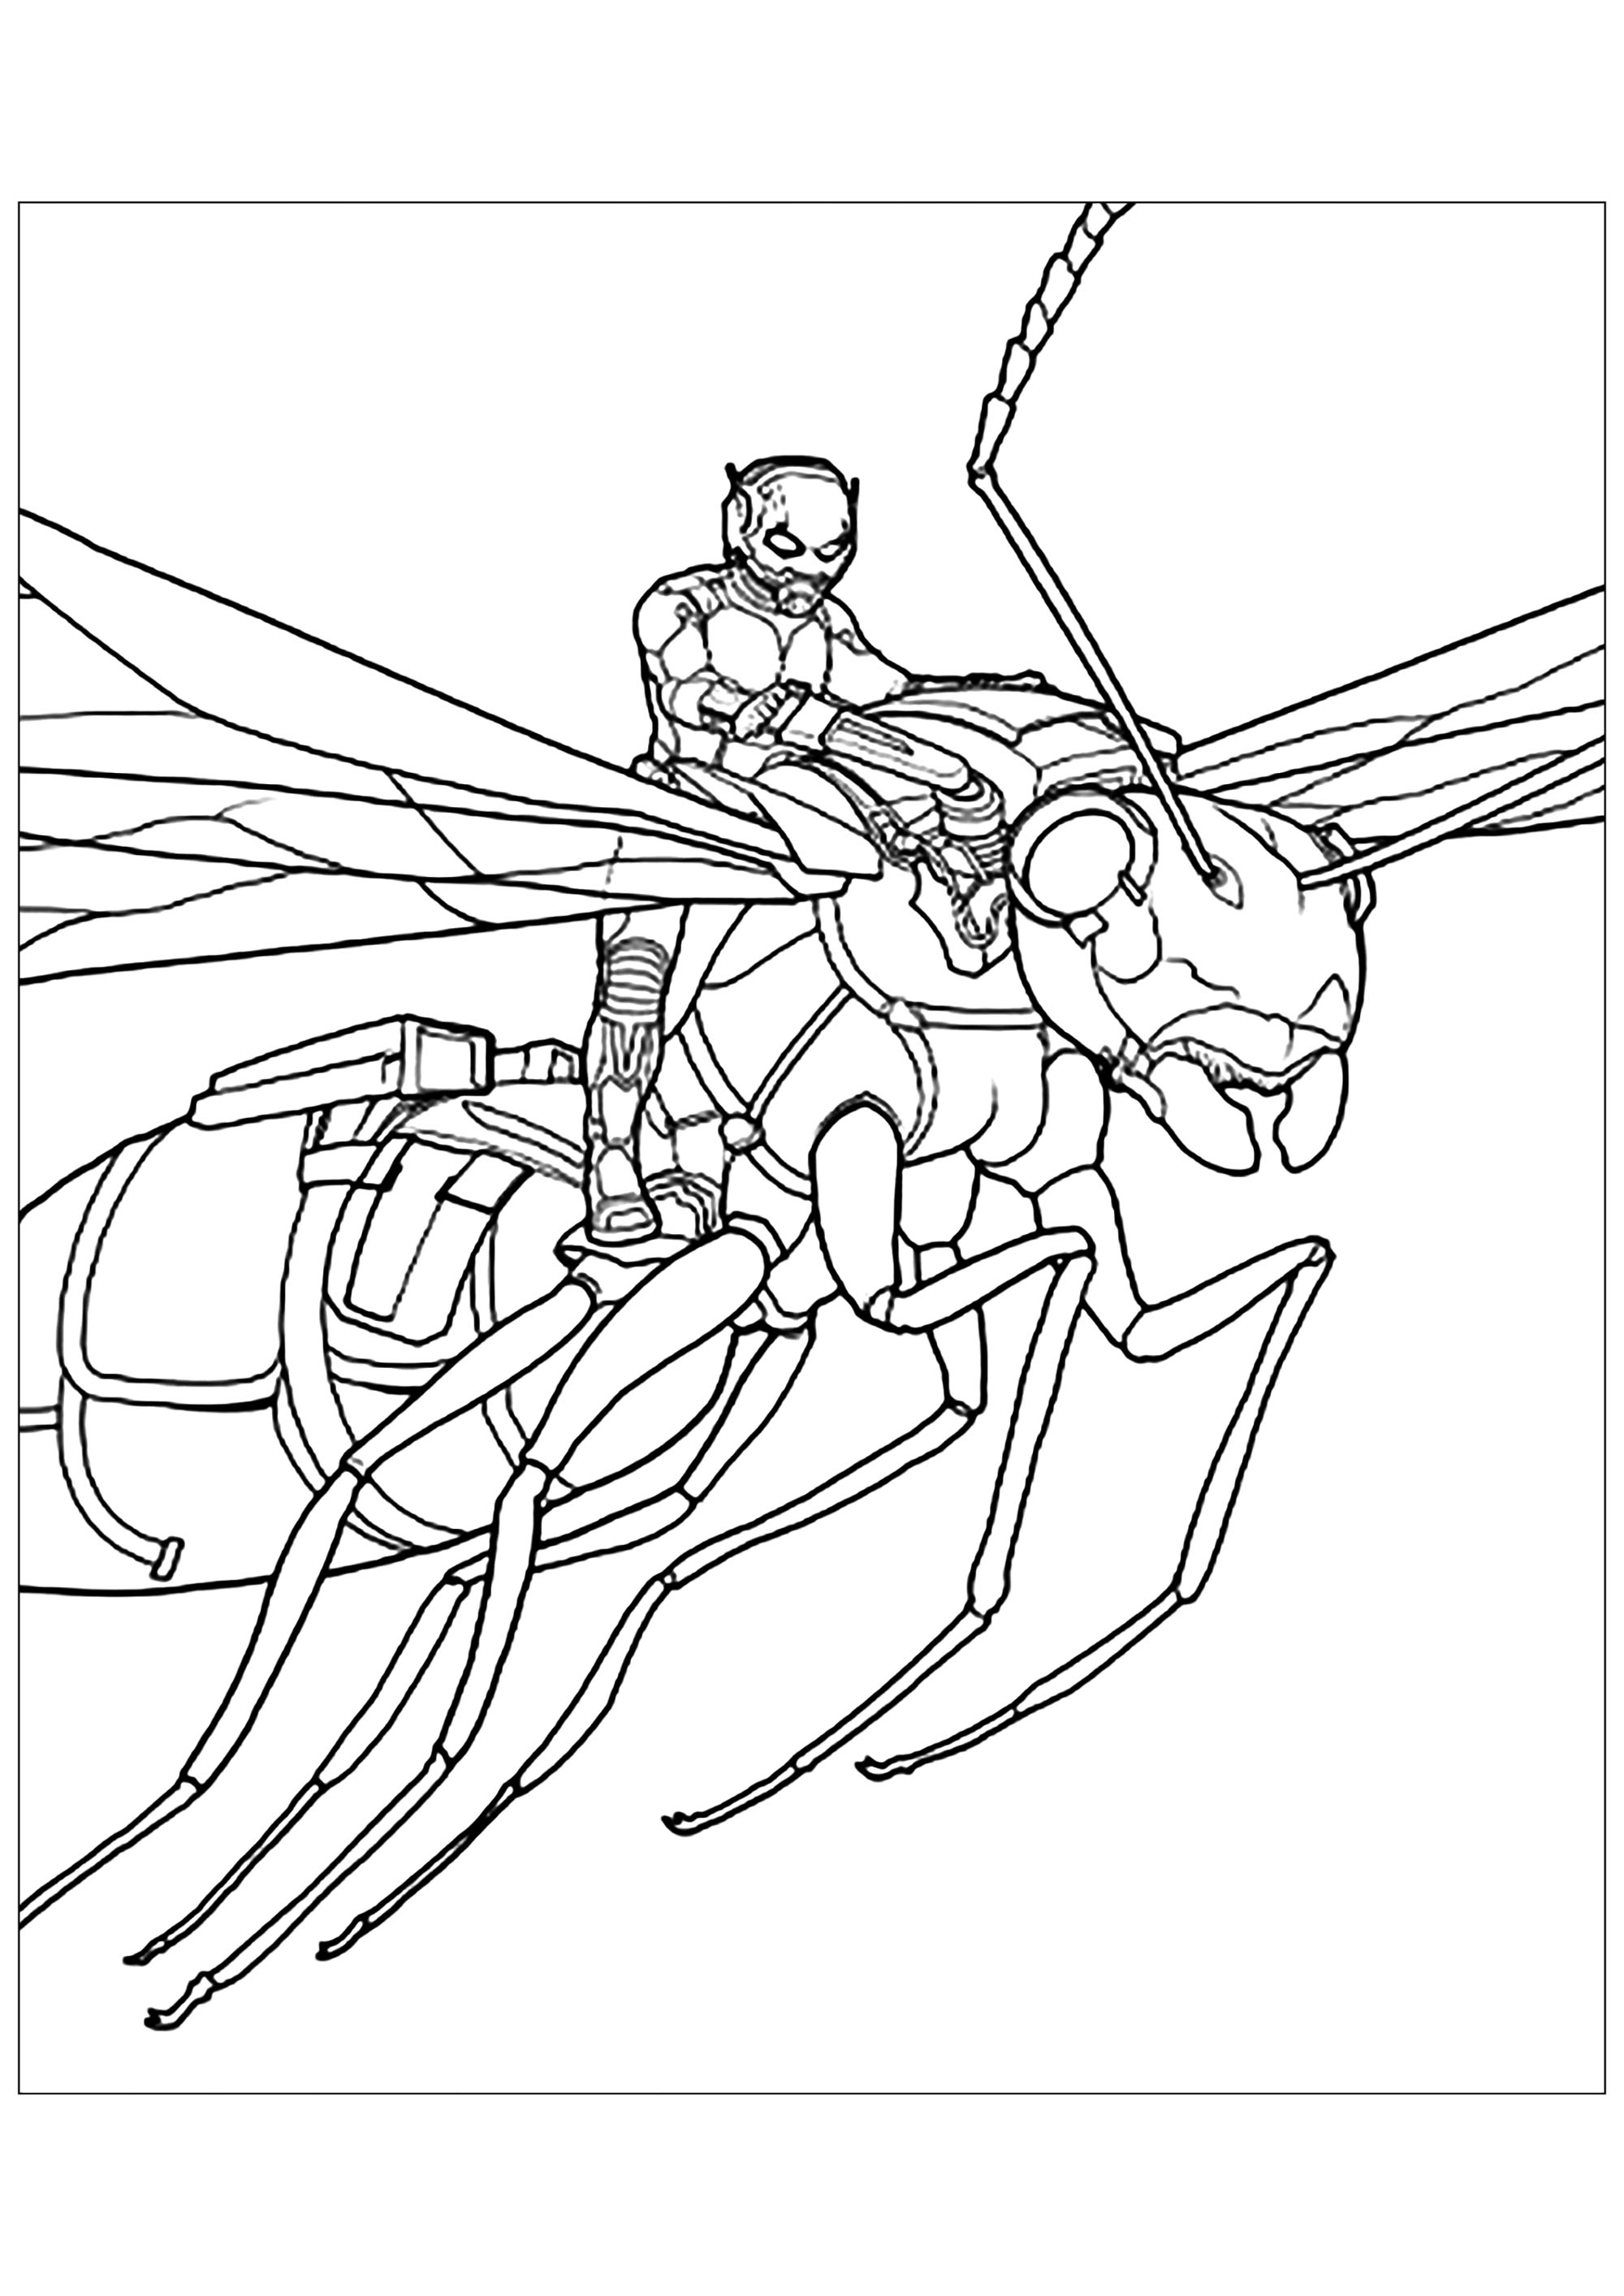 Ant Man - Ant-Man Kids Coloring Pages